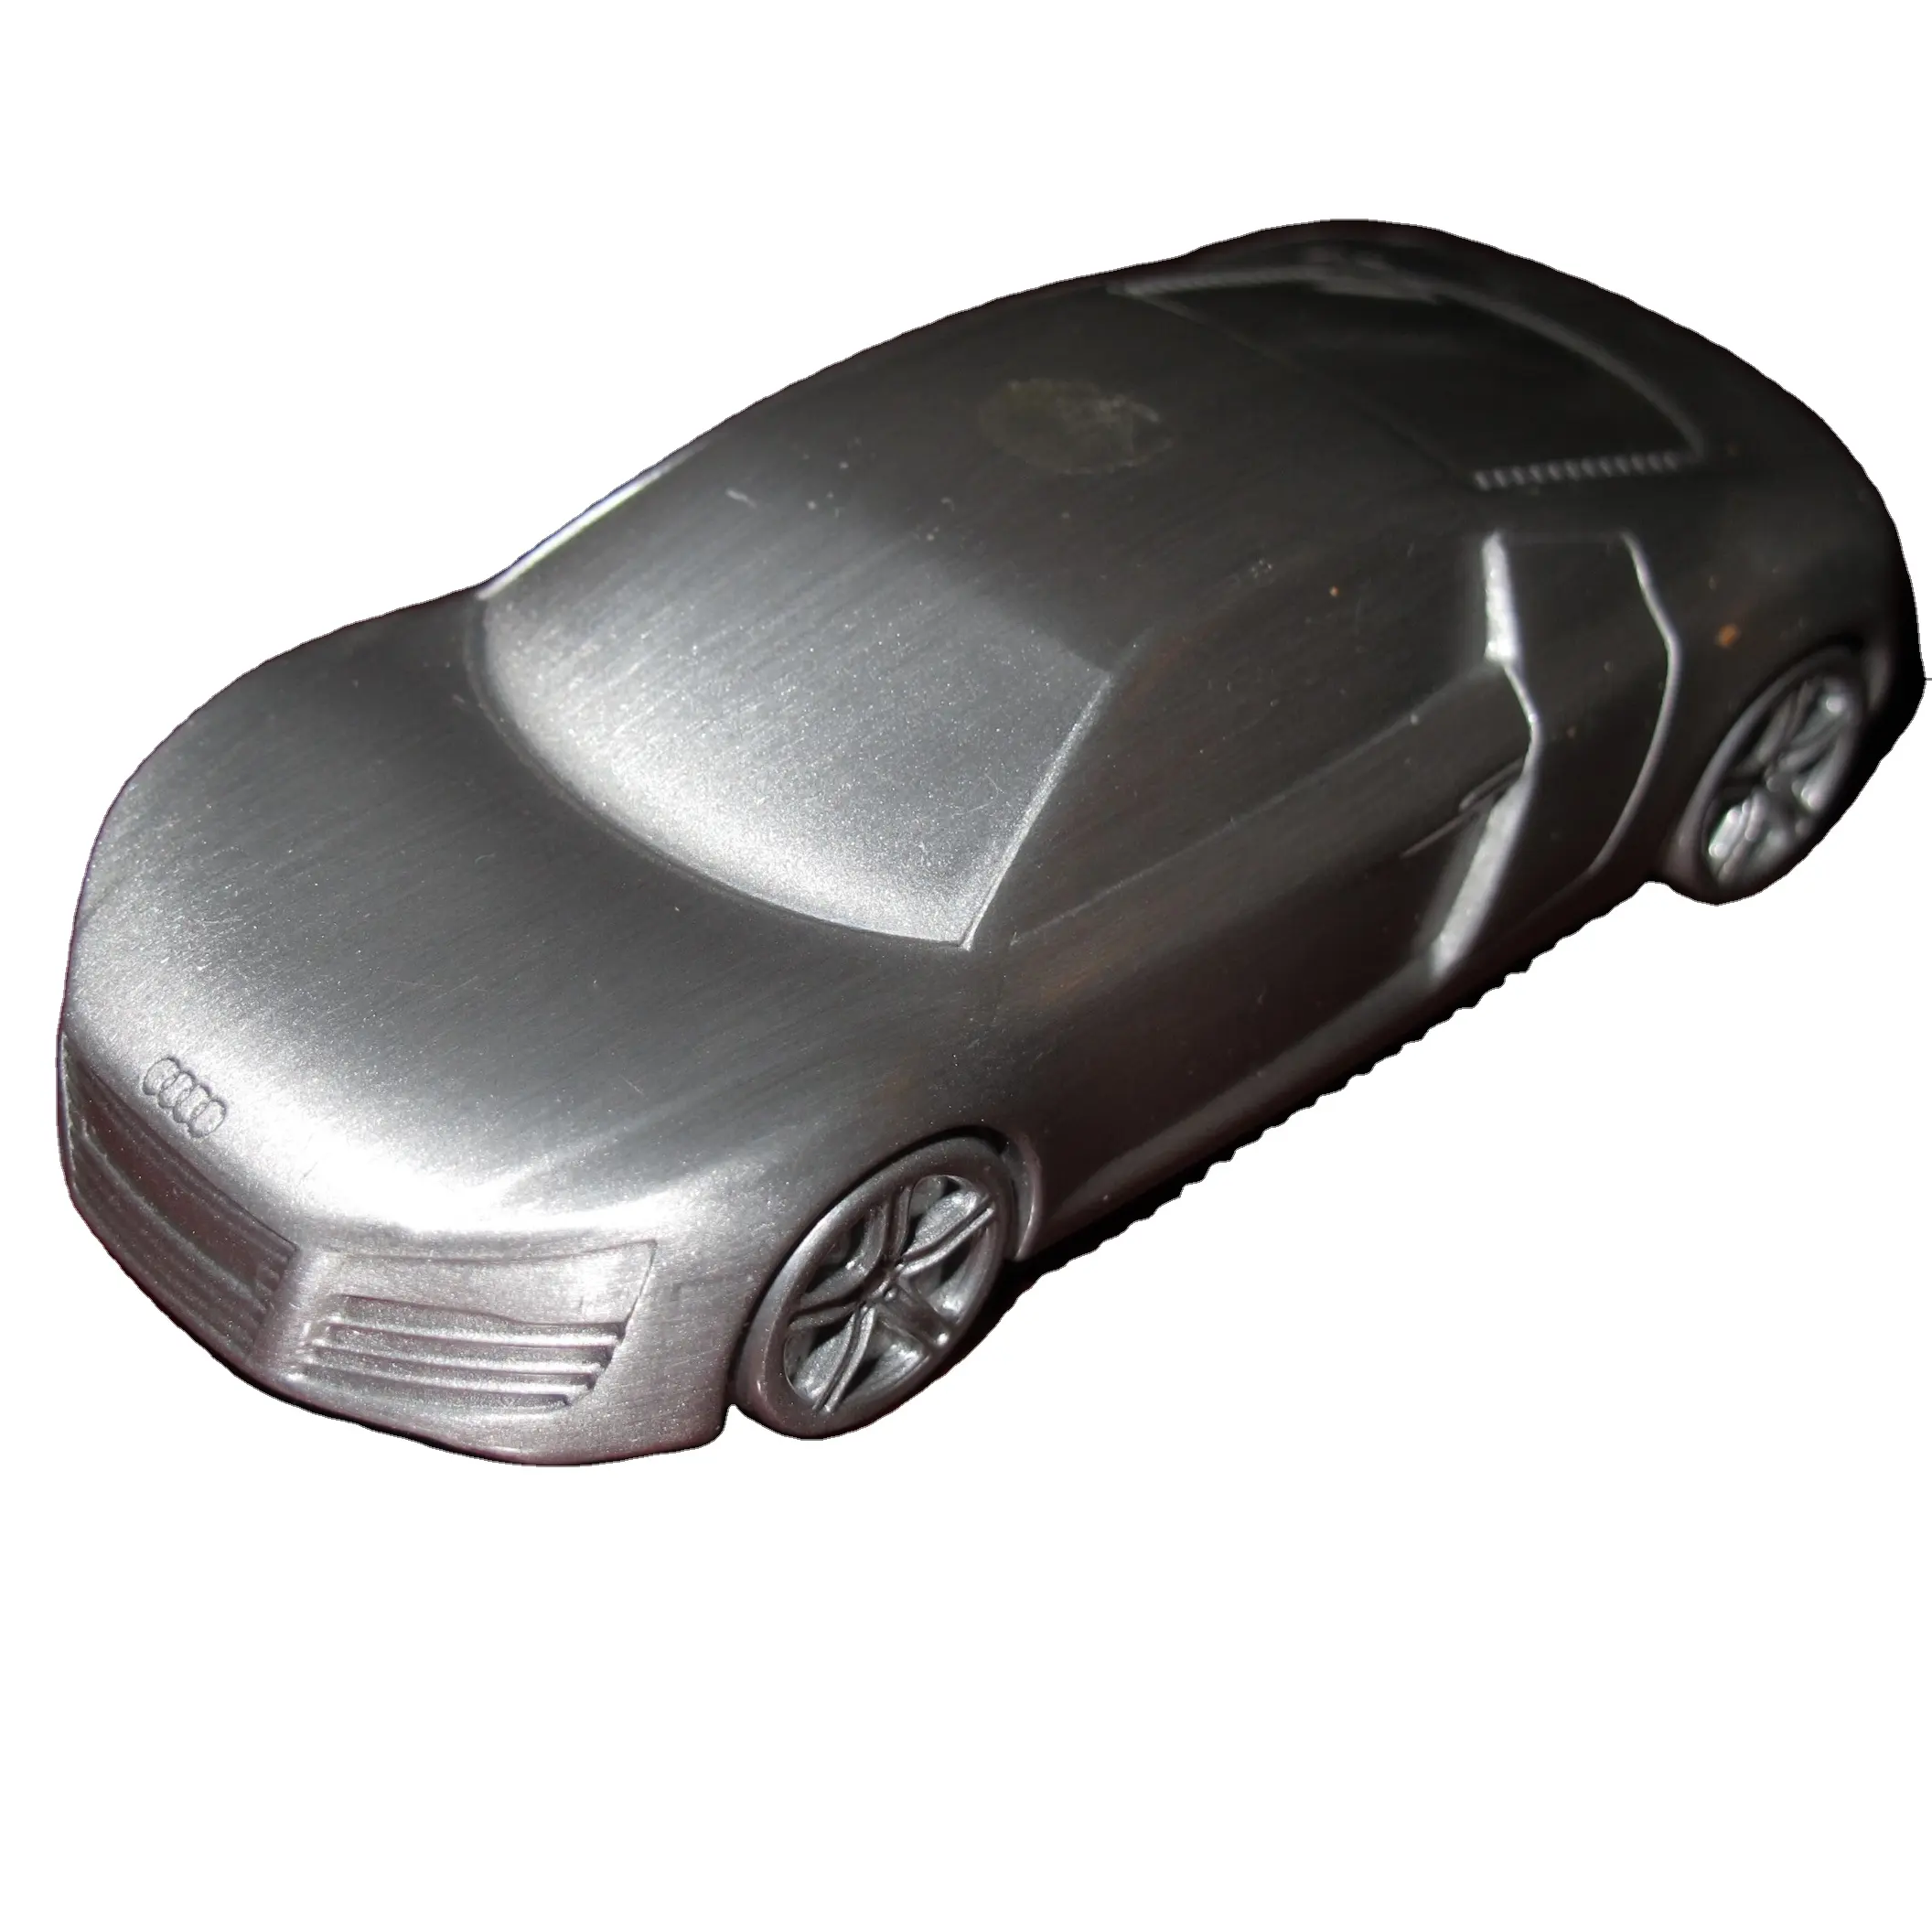 Die Casting Mould Car Model 1:18 1:24 Alloy Diecast Car Models Pull Back Collection Toy Cars for children